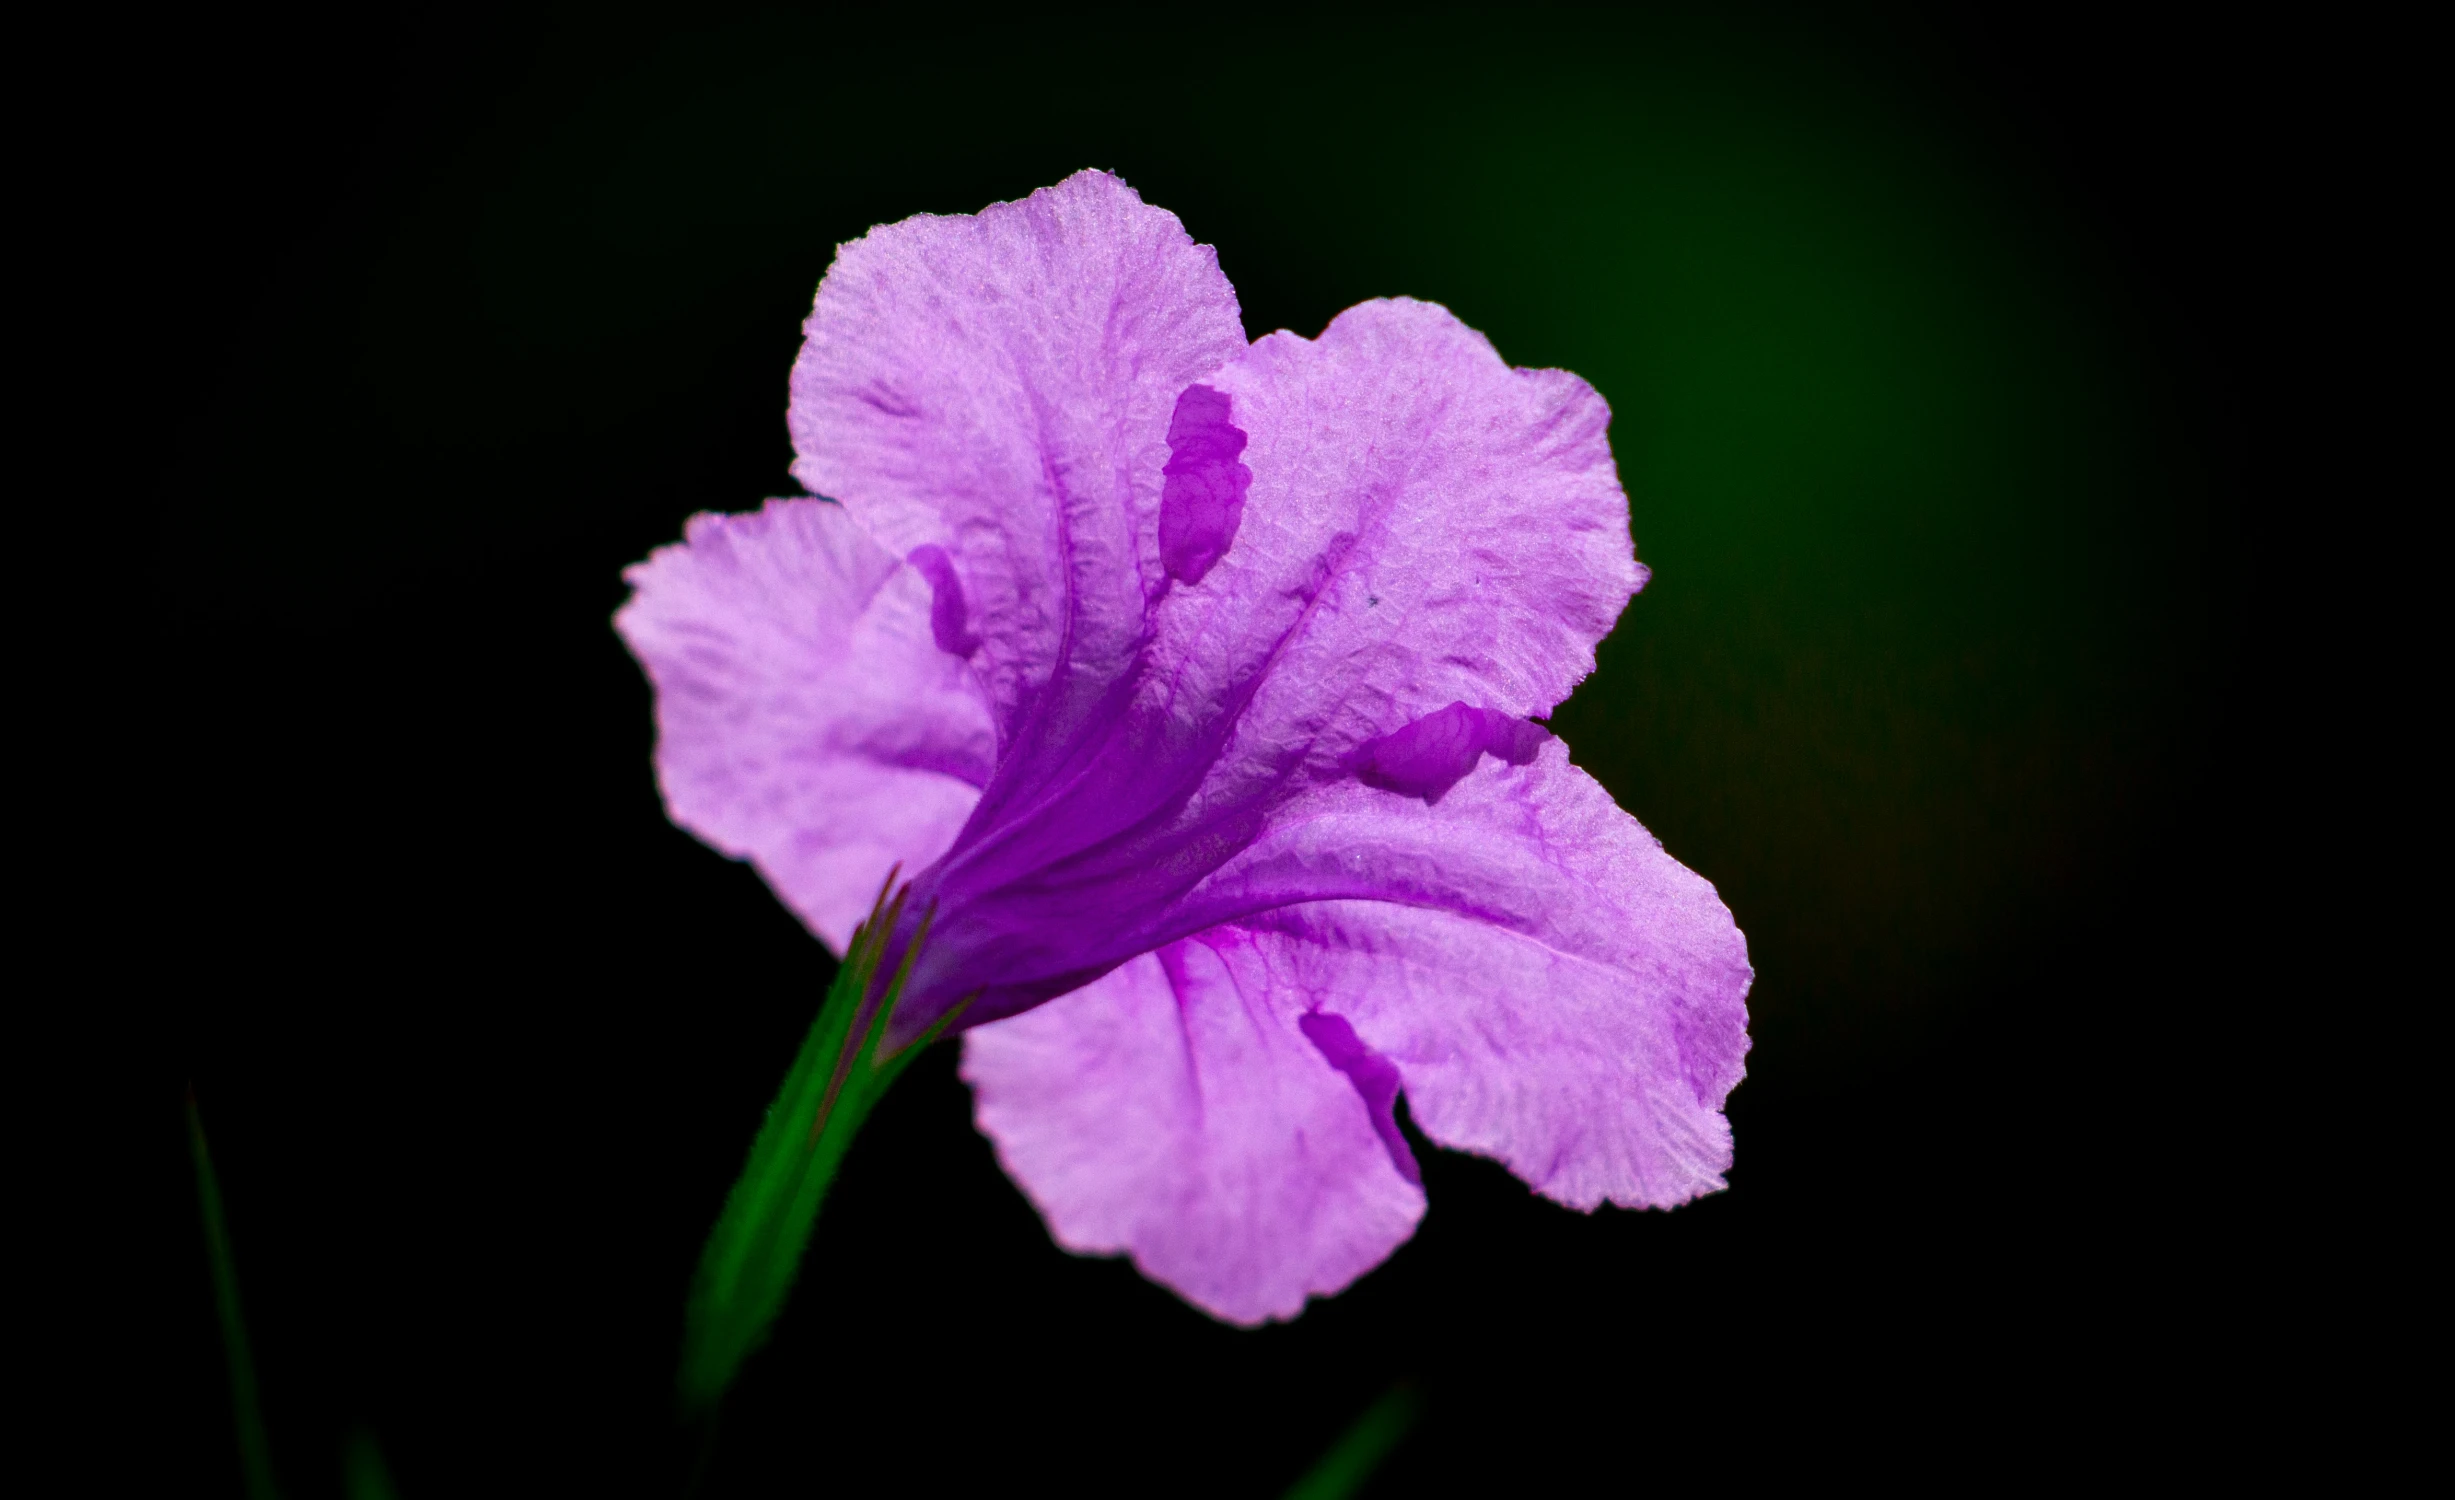 a purple flower that is growing on some leaves